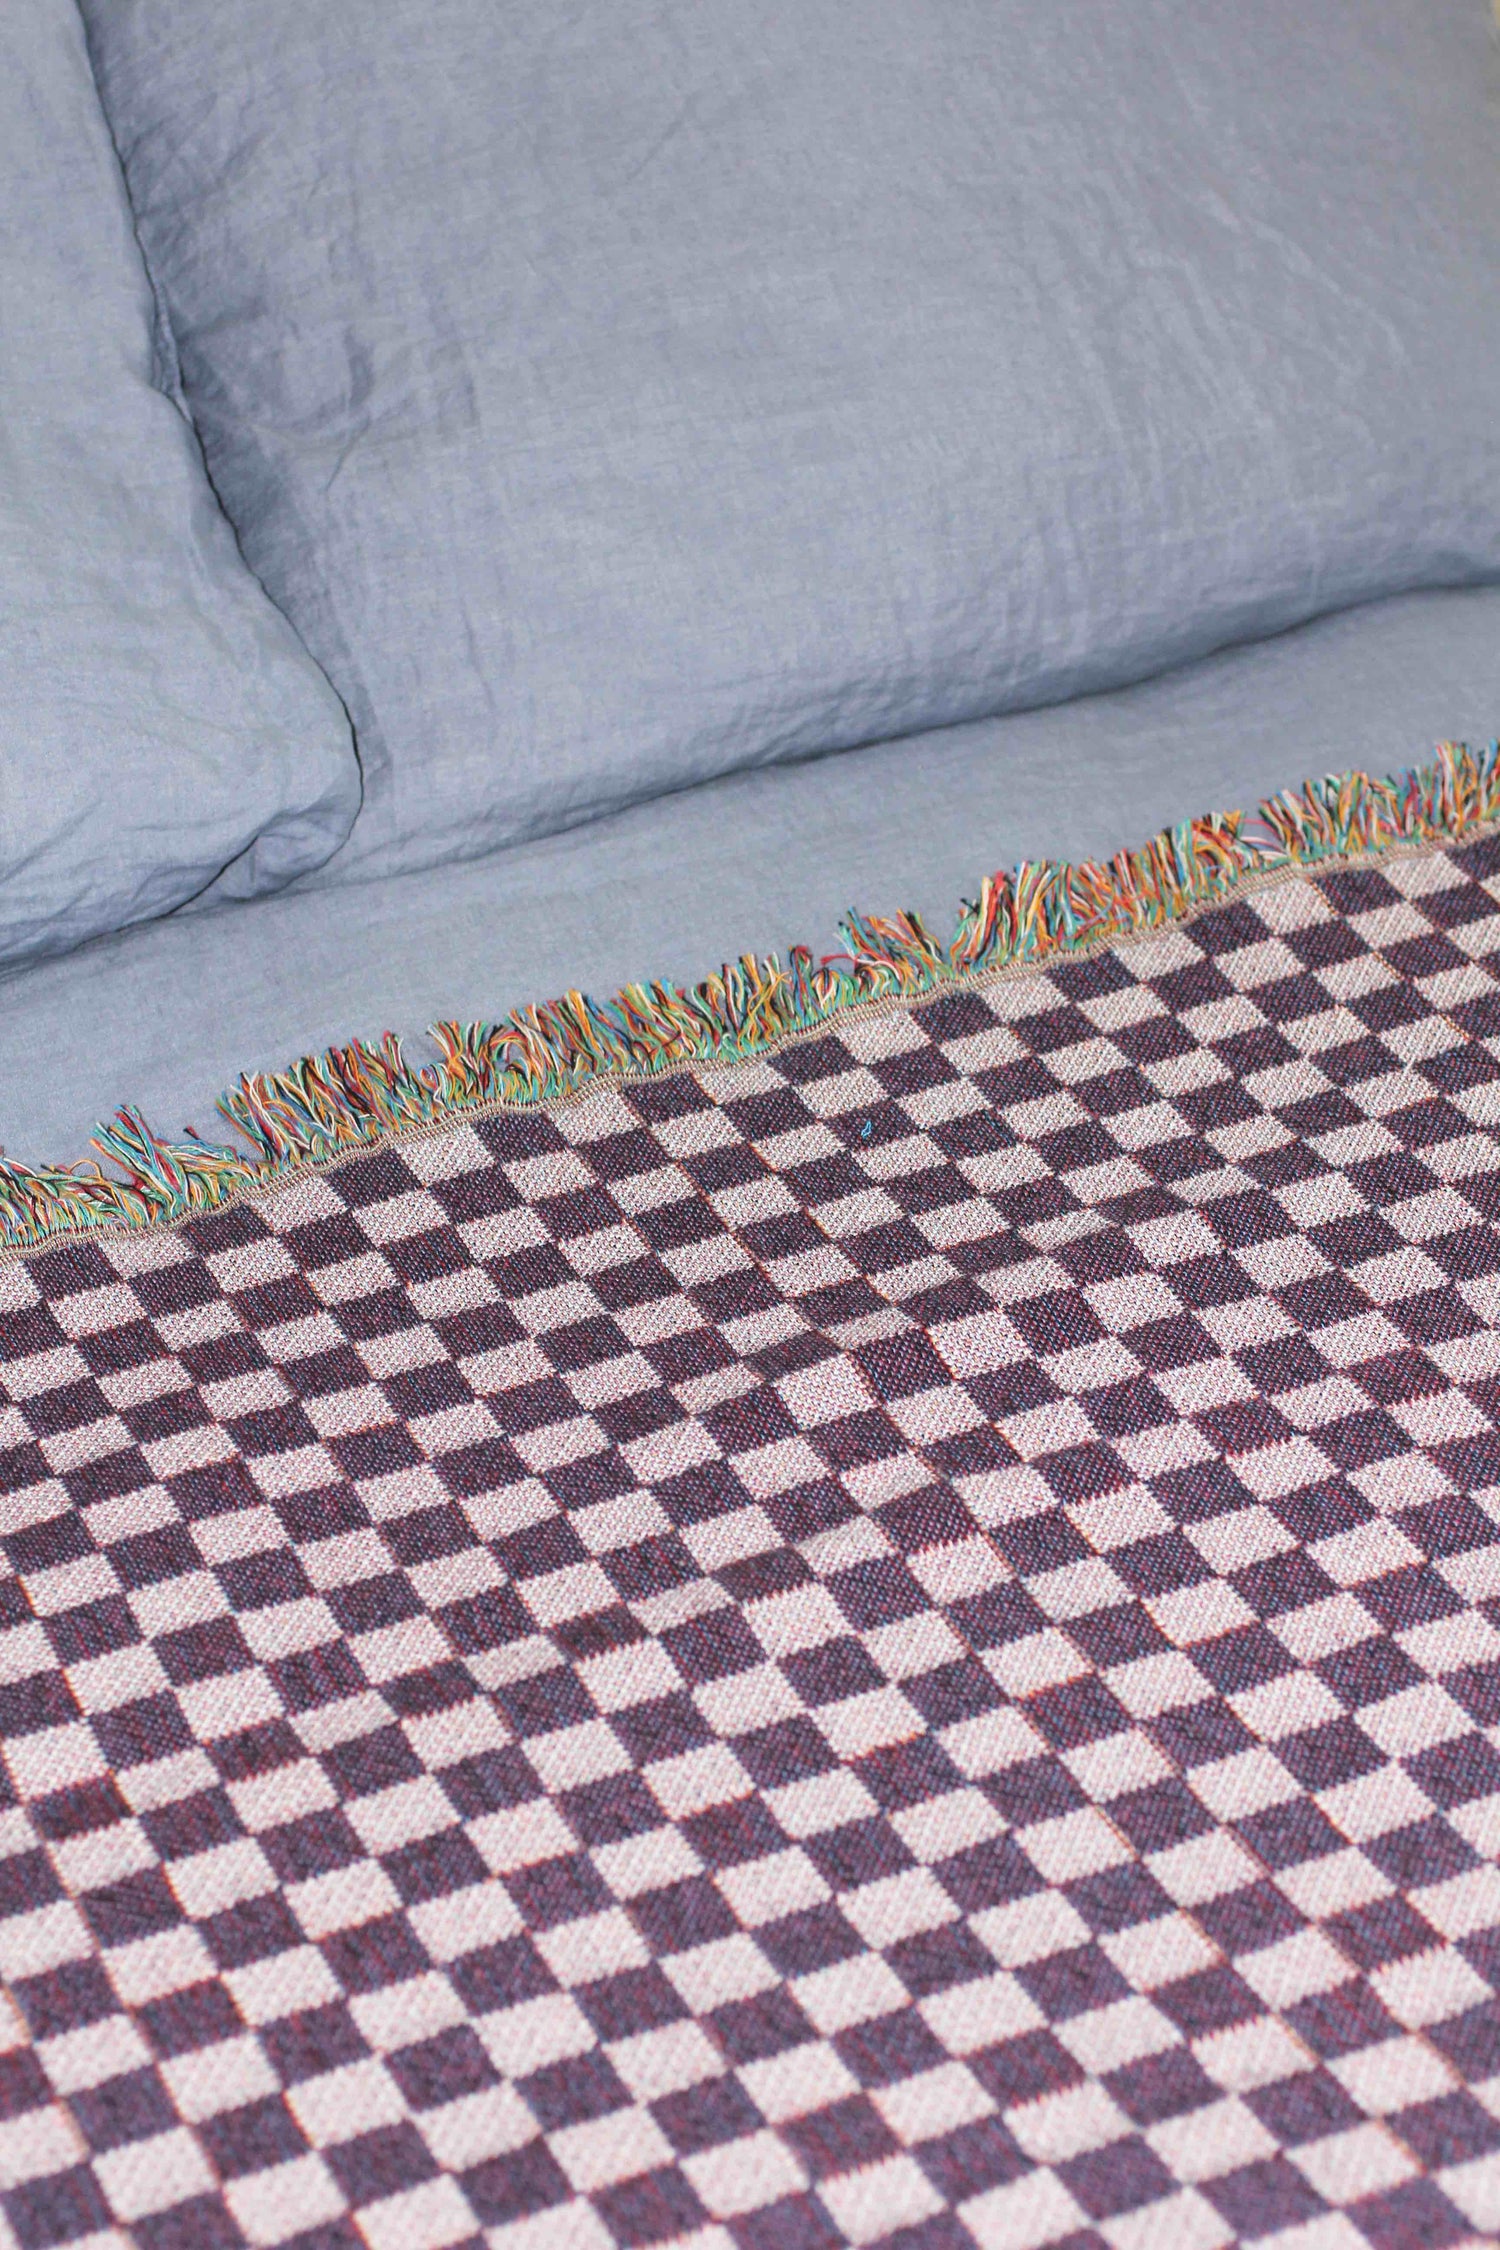 Back of 'Eat your Greens' micro check blanket on bed